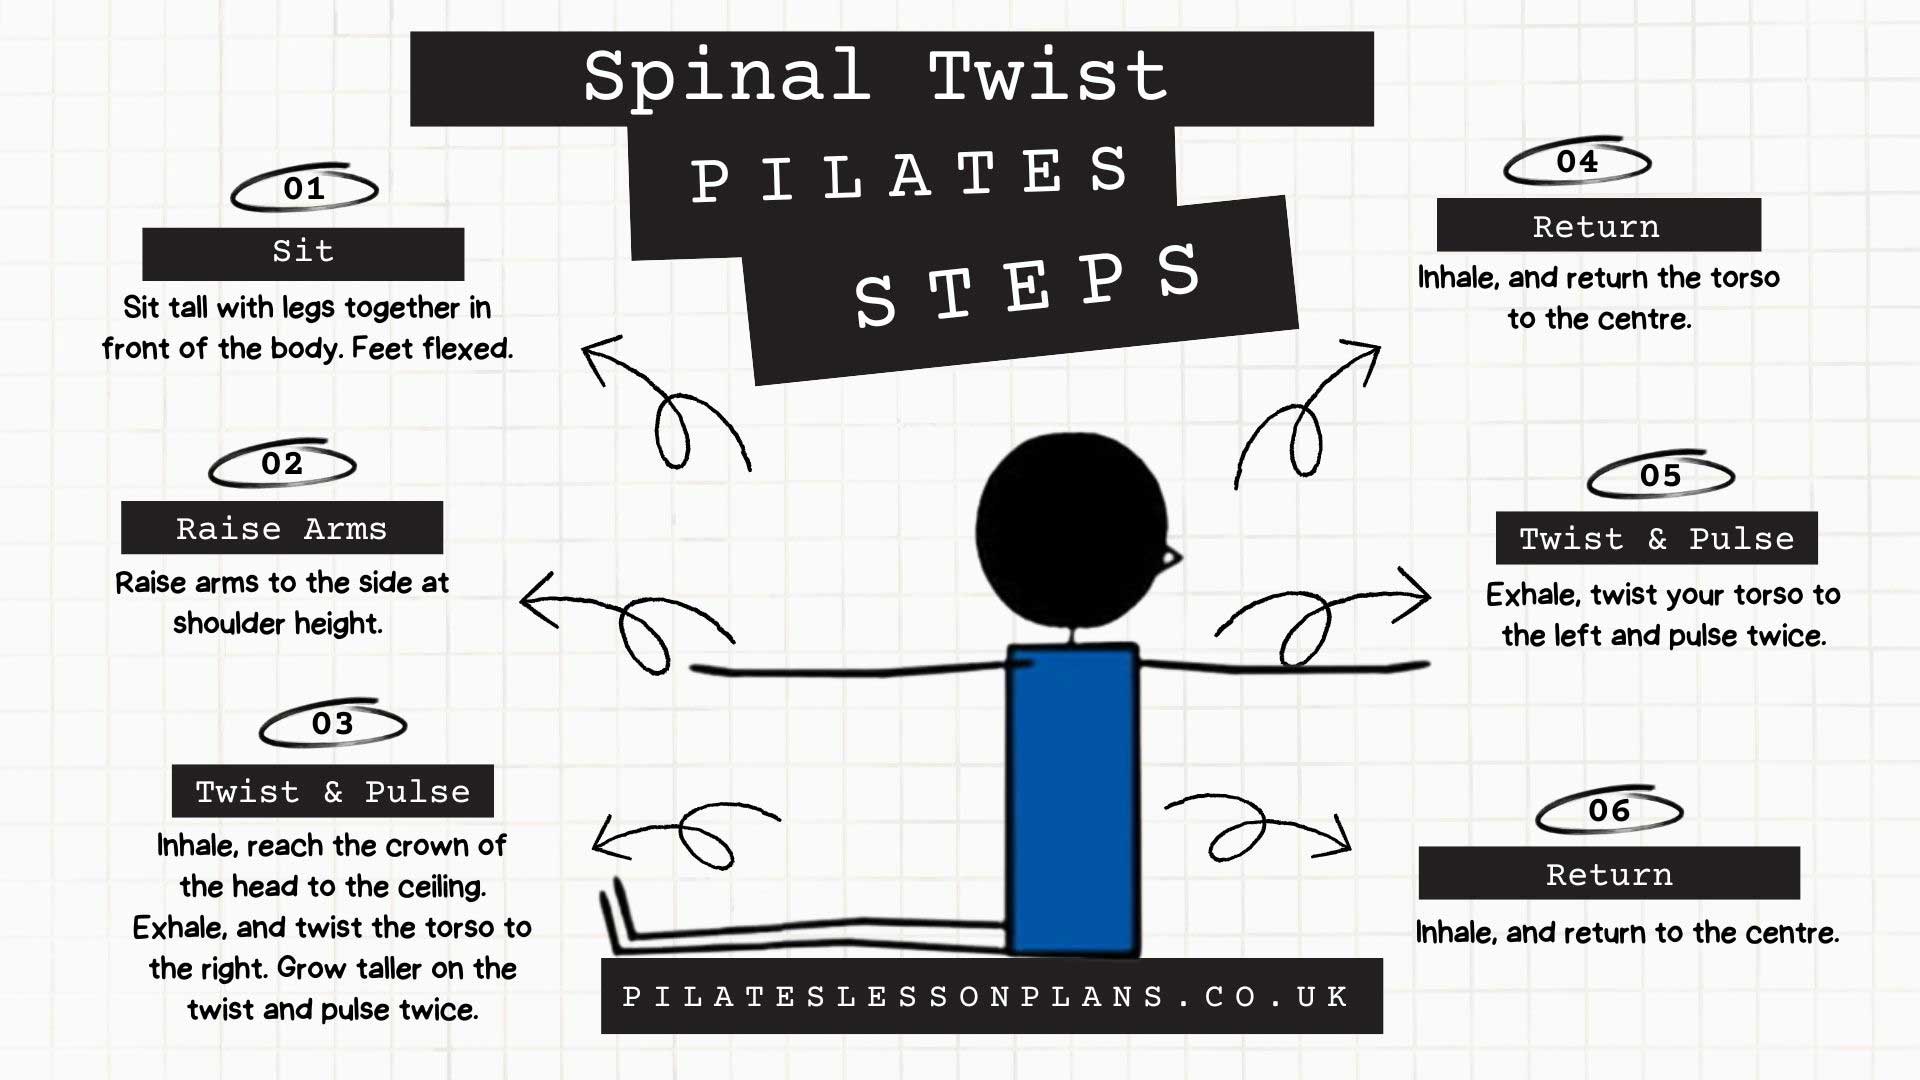 Spinal Twist Pilates Steps Infographic